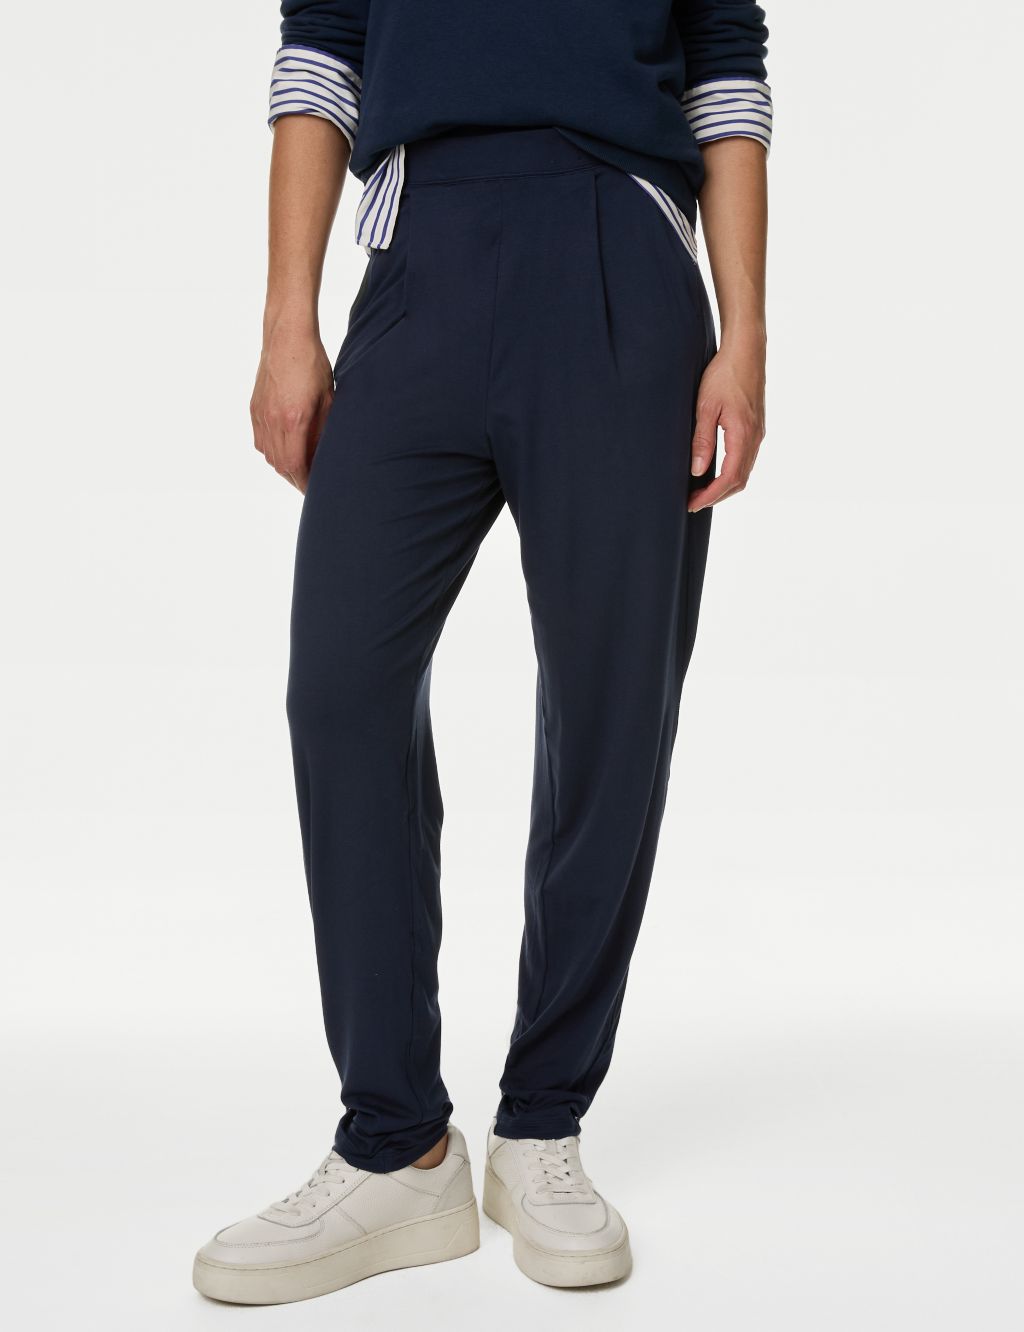 Jersey Tapered Ankle Grazer Trousers image 4